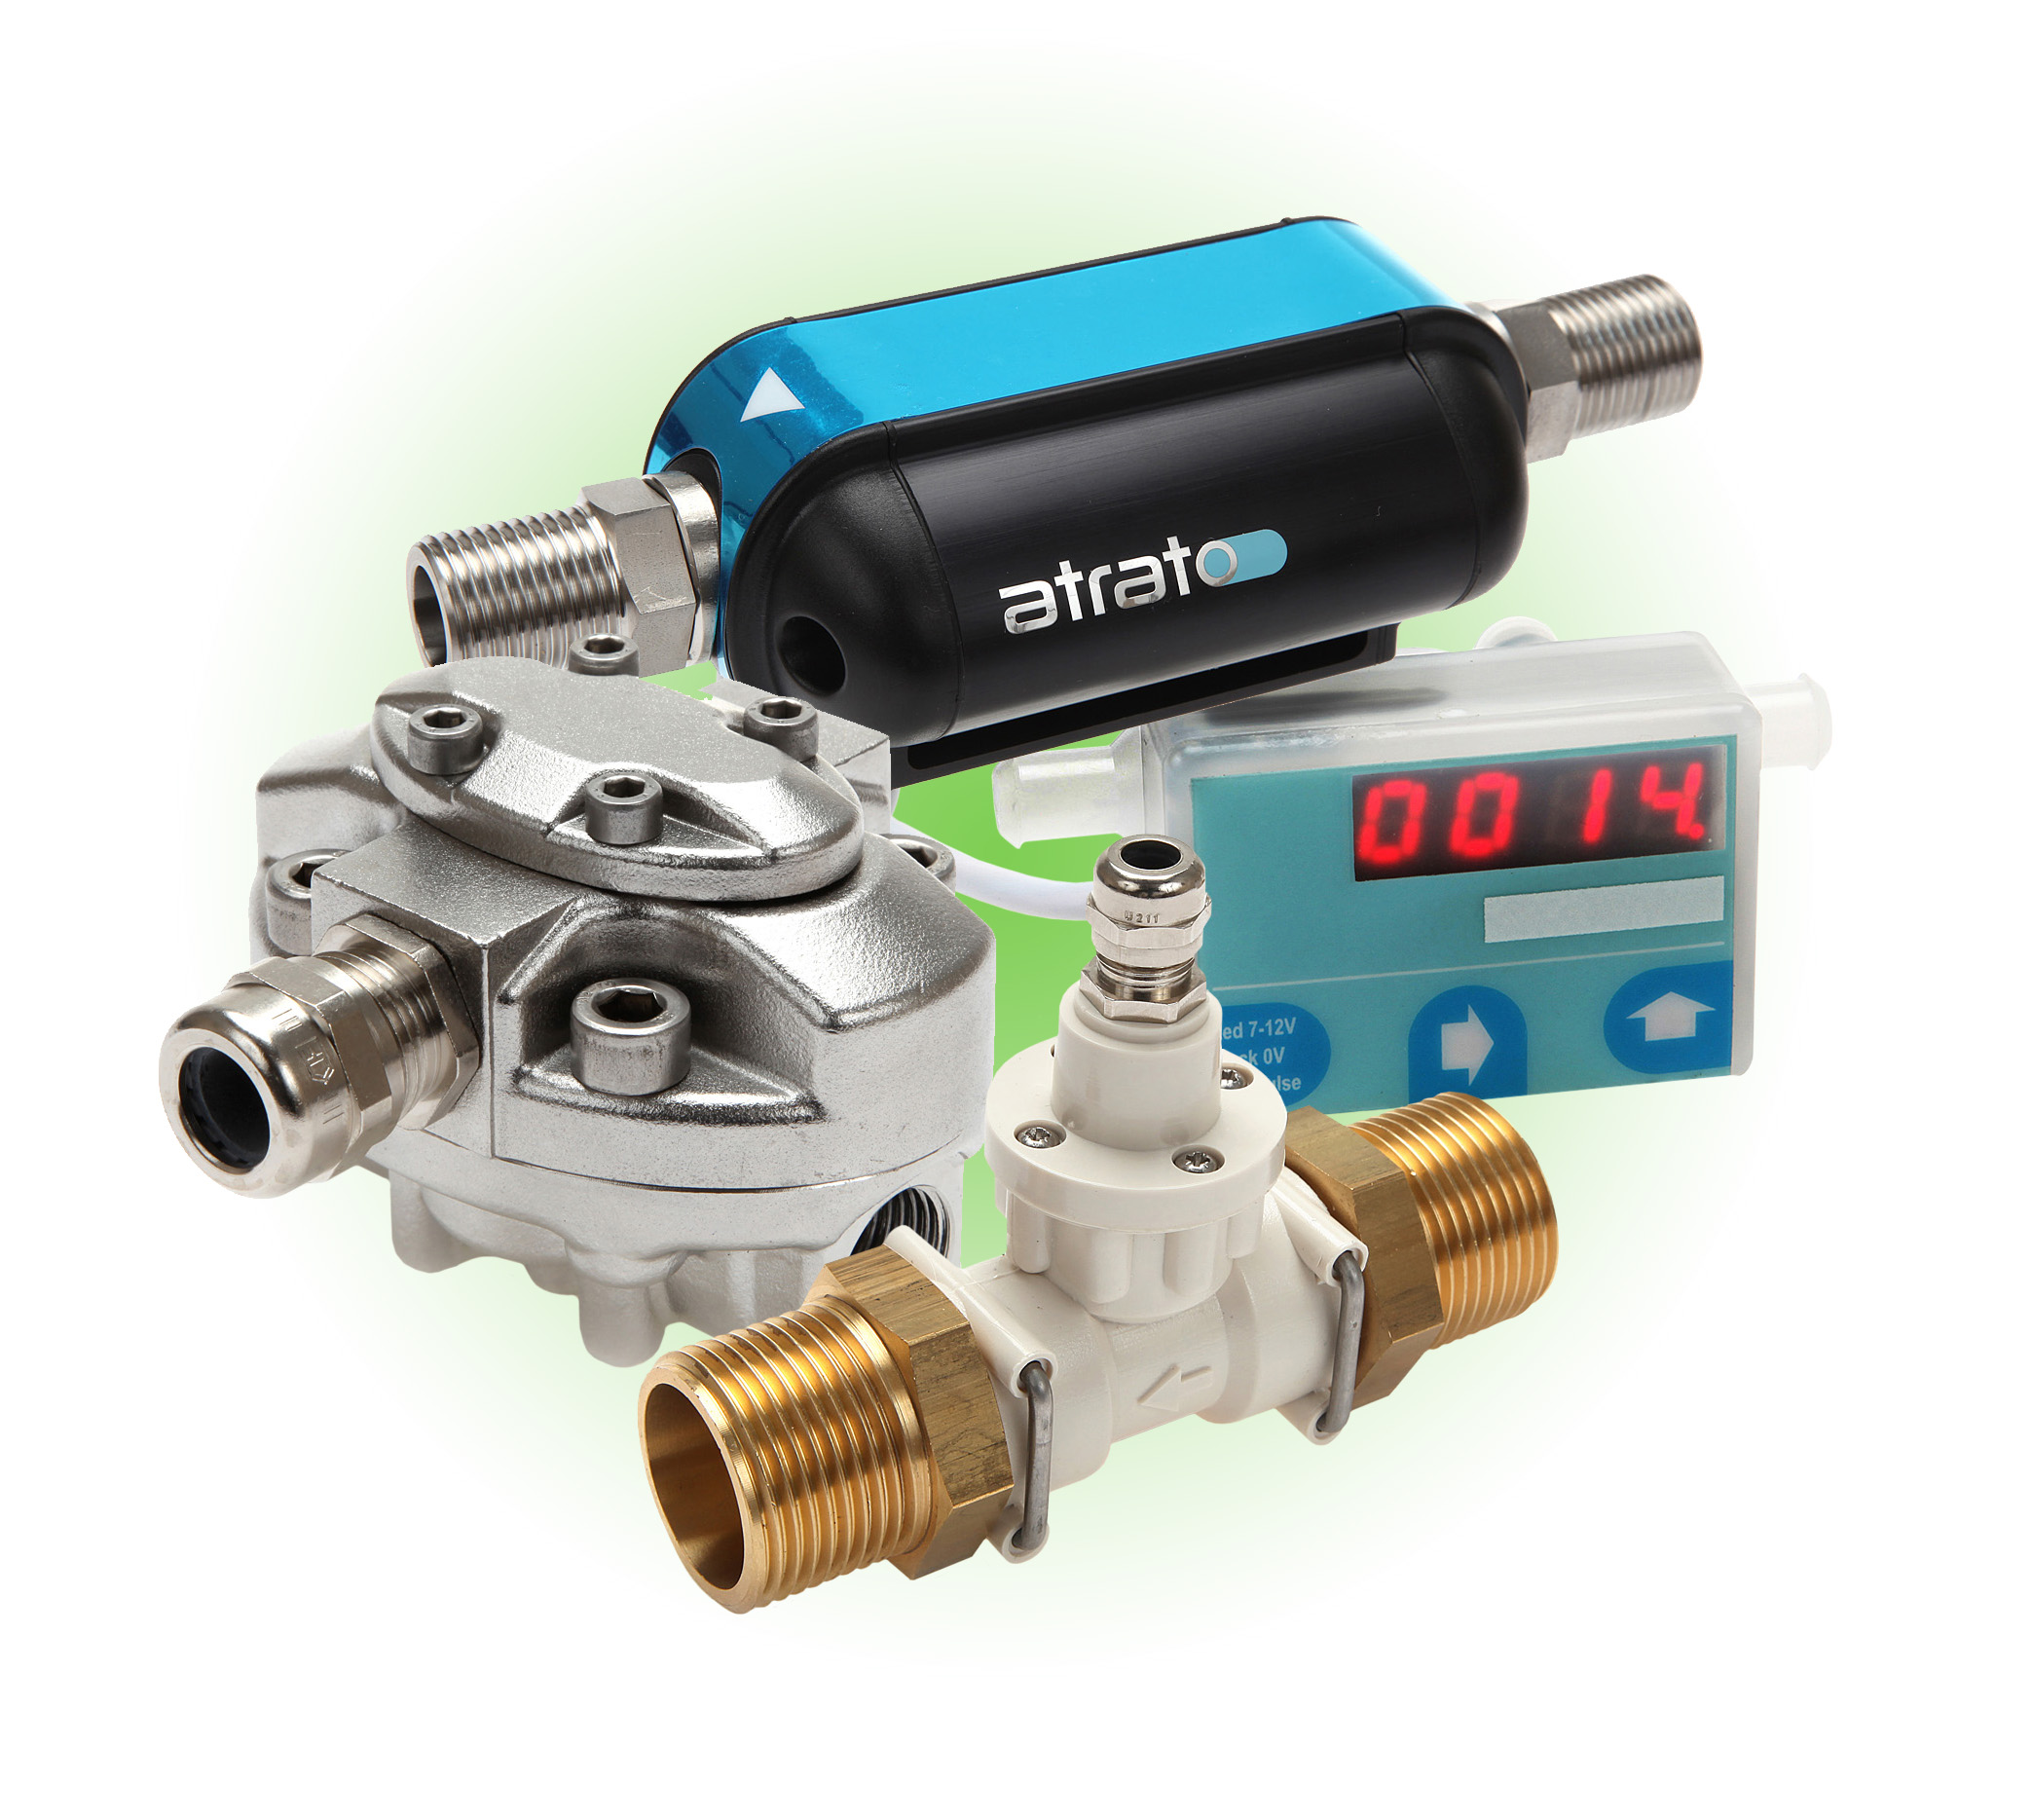 The Evolution and Future of Small Bore Ultrasonic Flow Meters